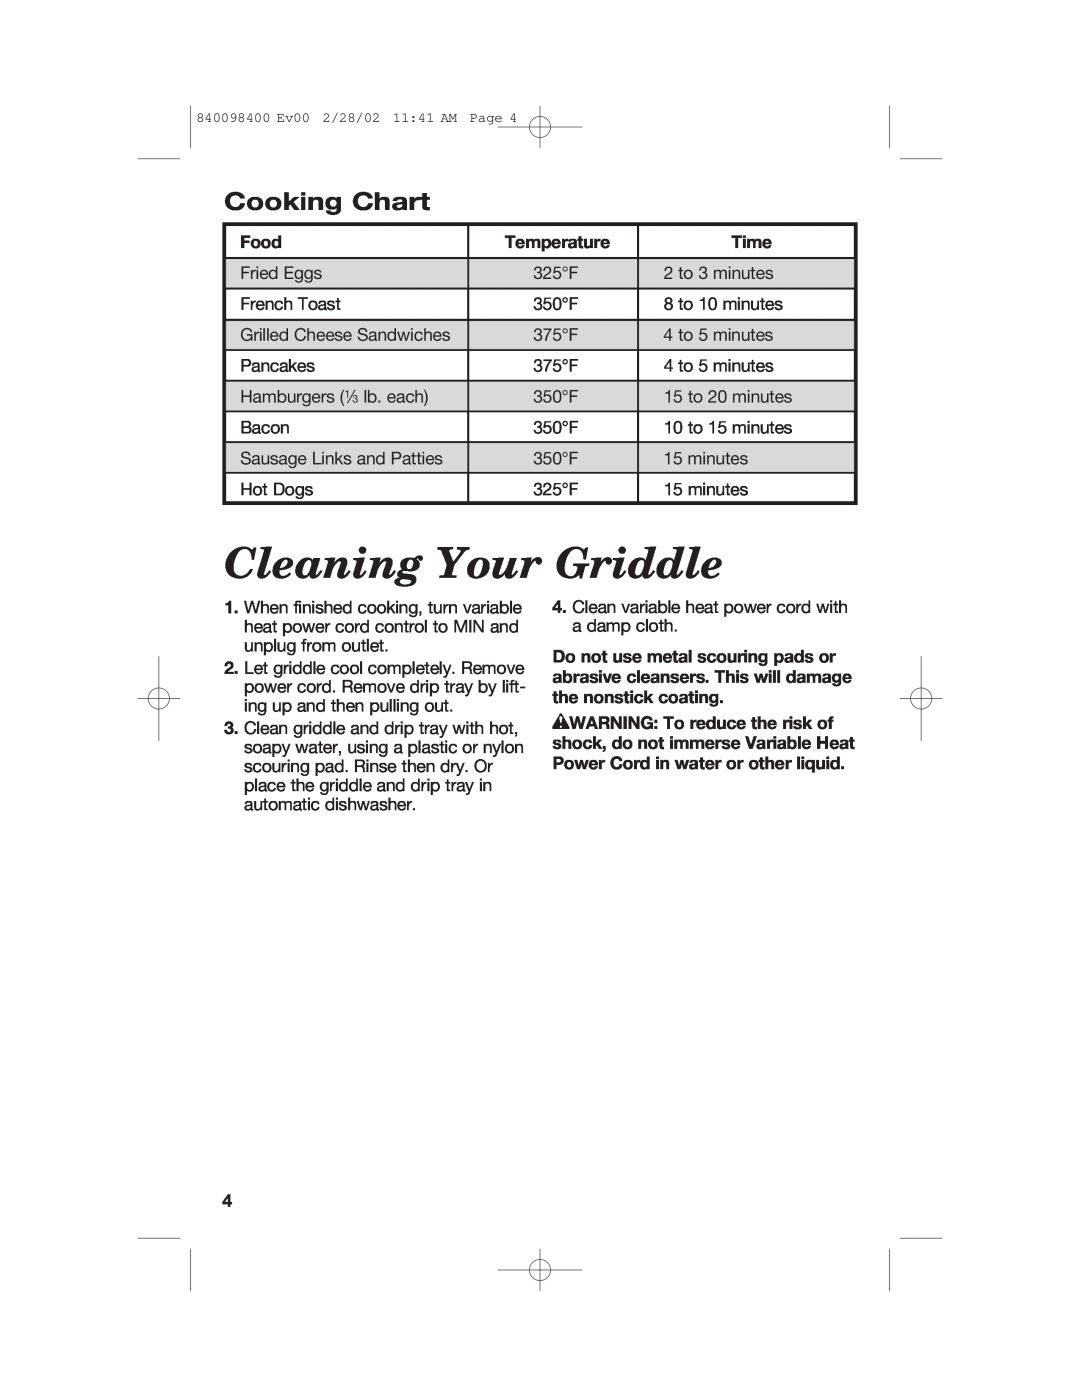 Hamilton Beach Electric Griddle manual Cleaning Your Griddle, Cooking Chart, Food, Temperature, Time 